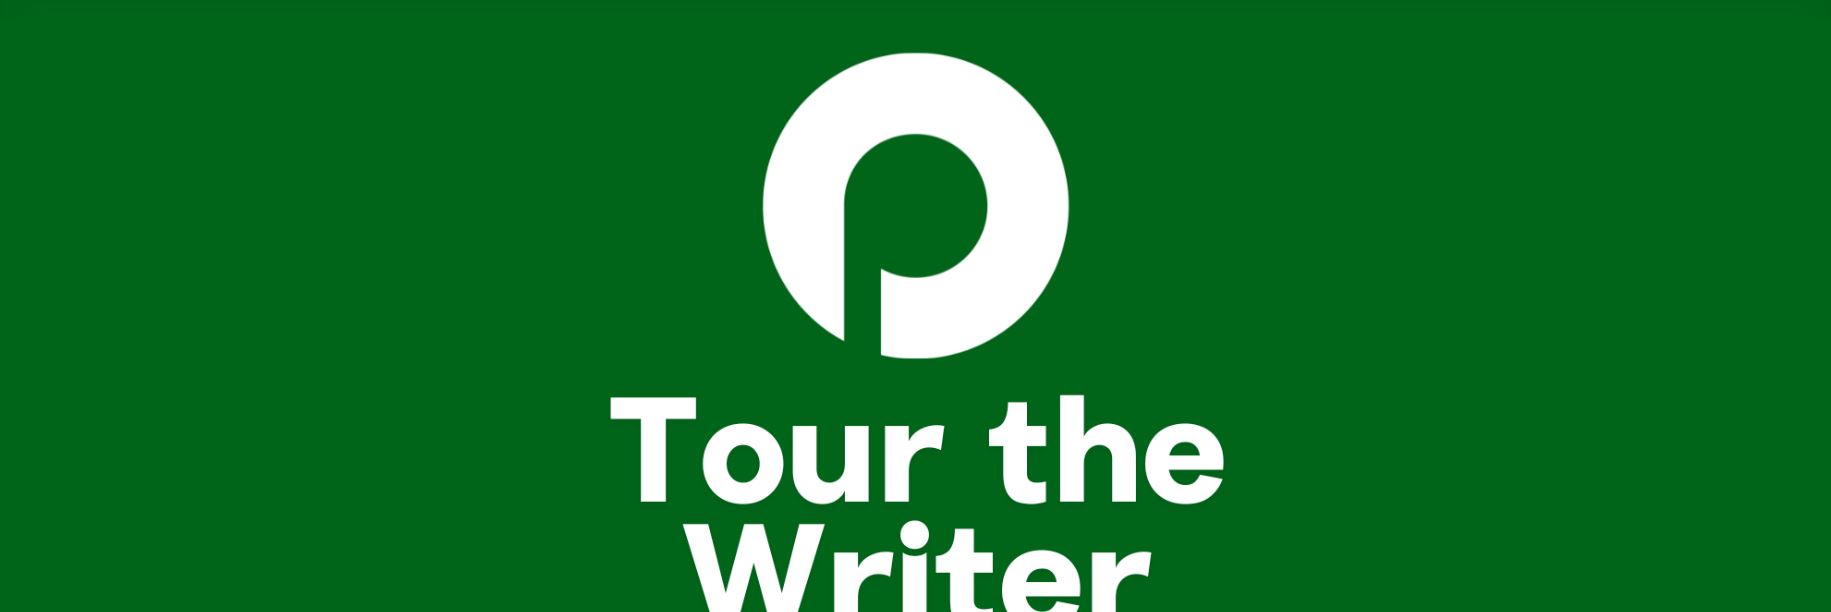 Tour the Writer: Call out for writers and storytellers